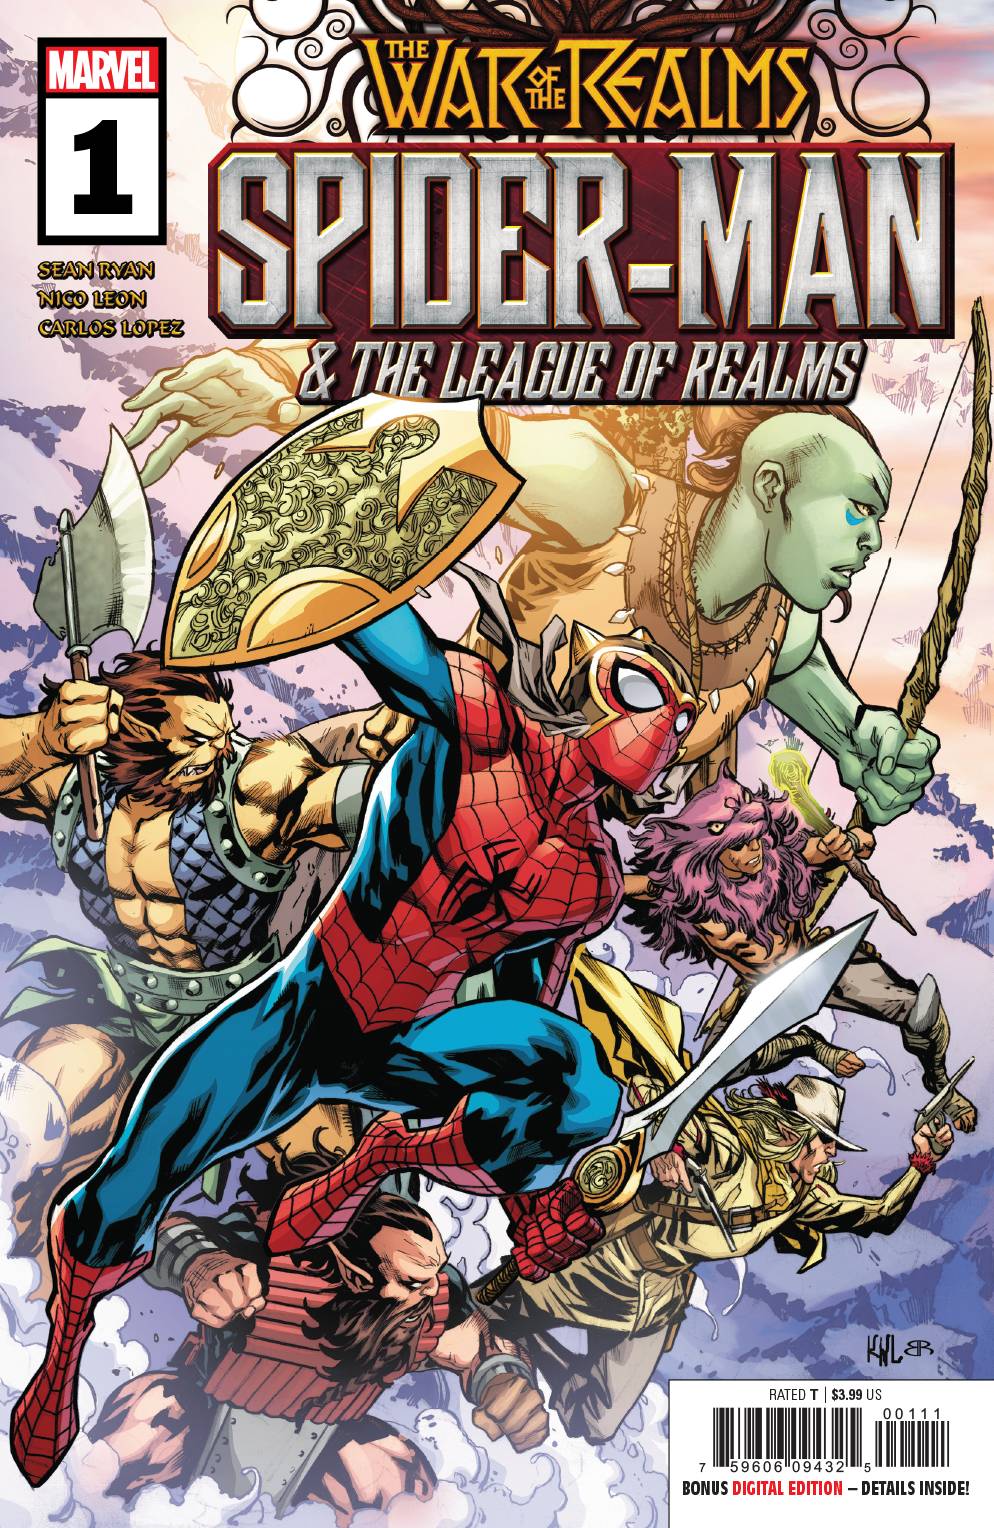 War of Realms Spider-Man & League of Realms #1 (Of 3)